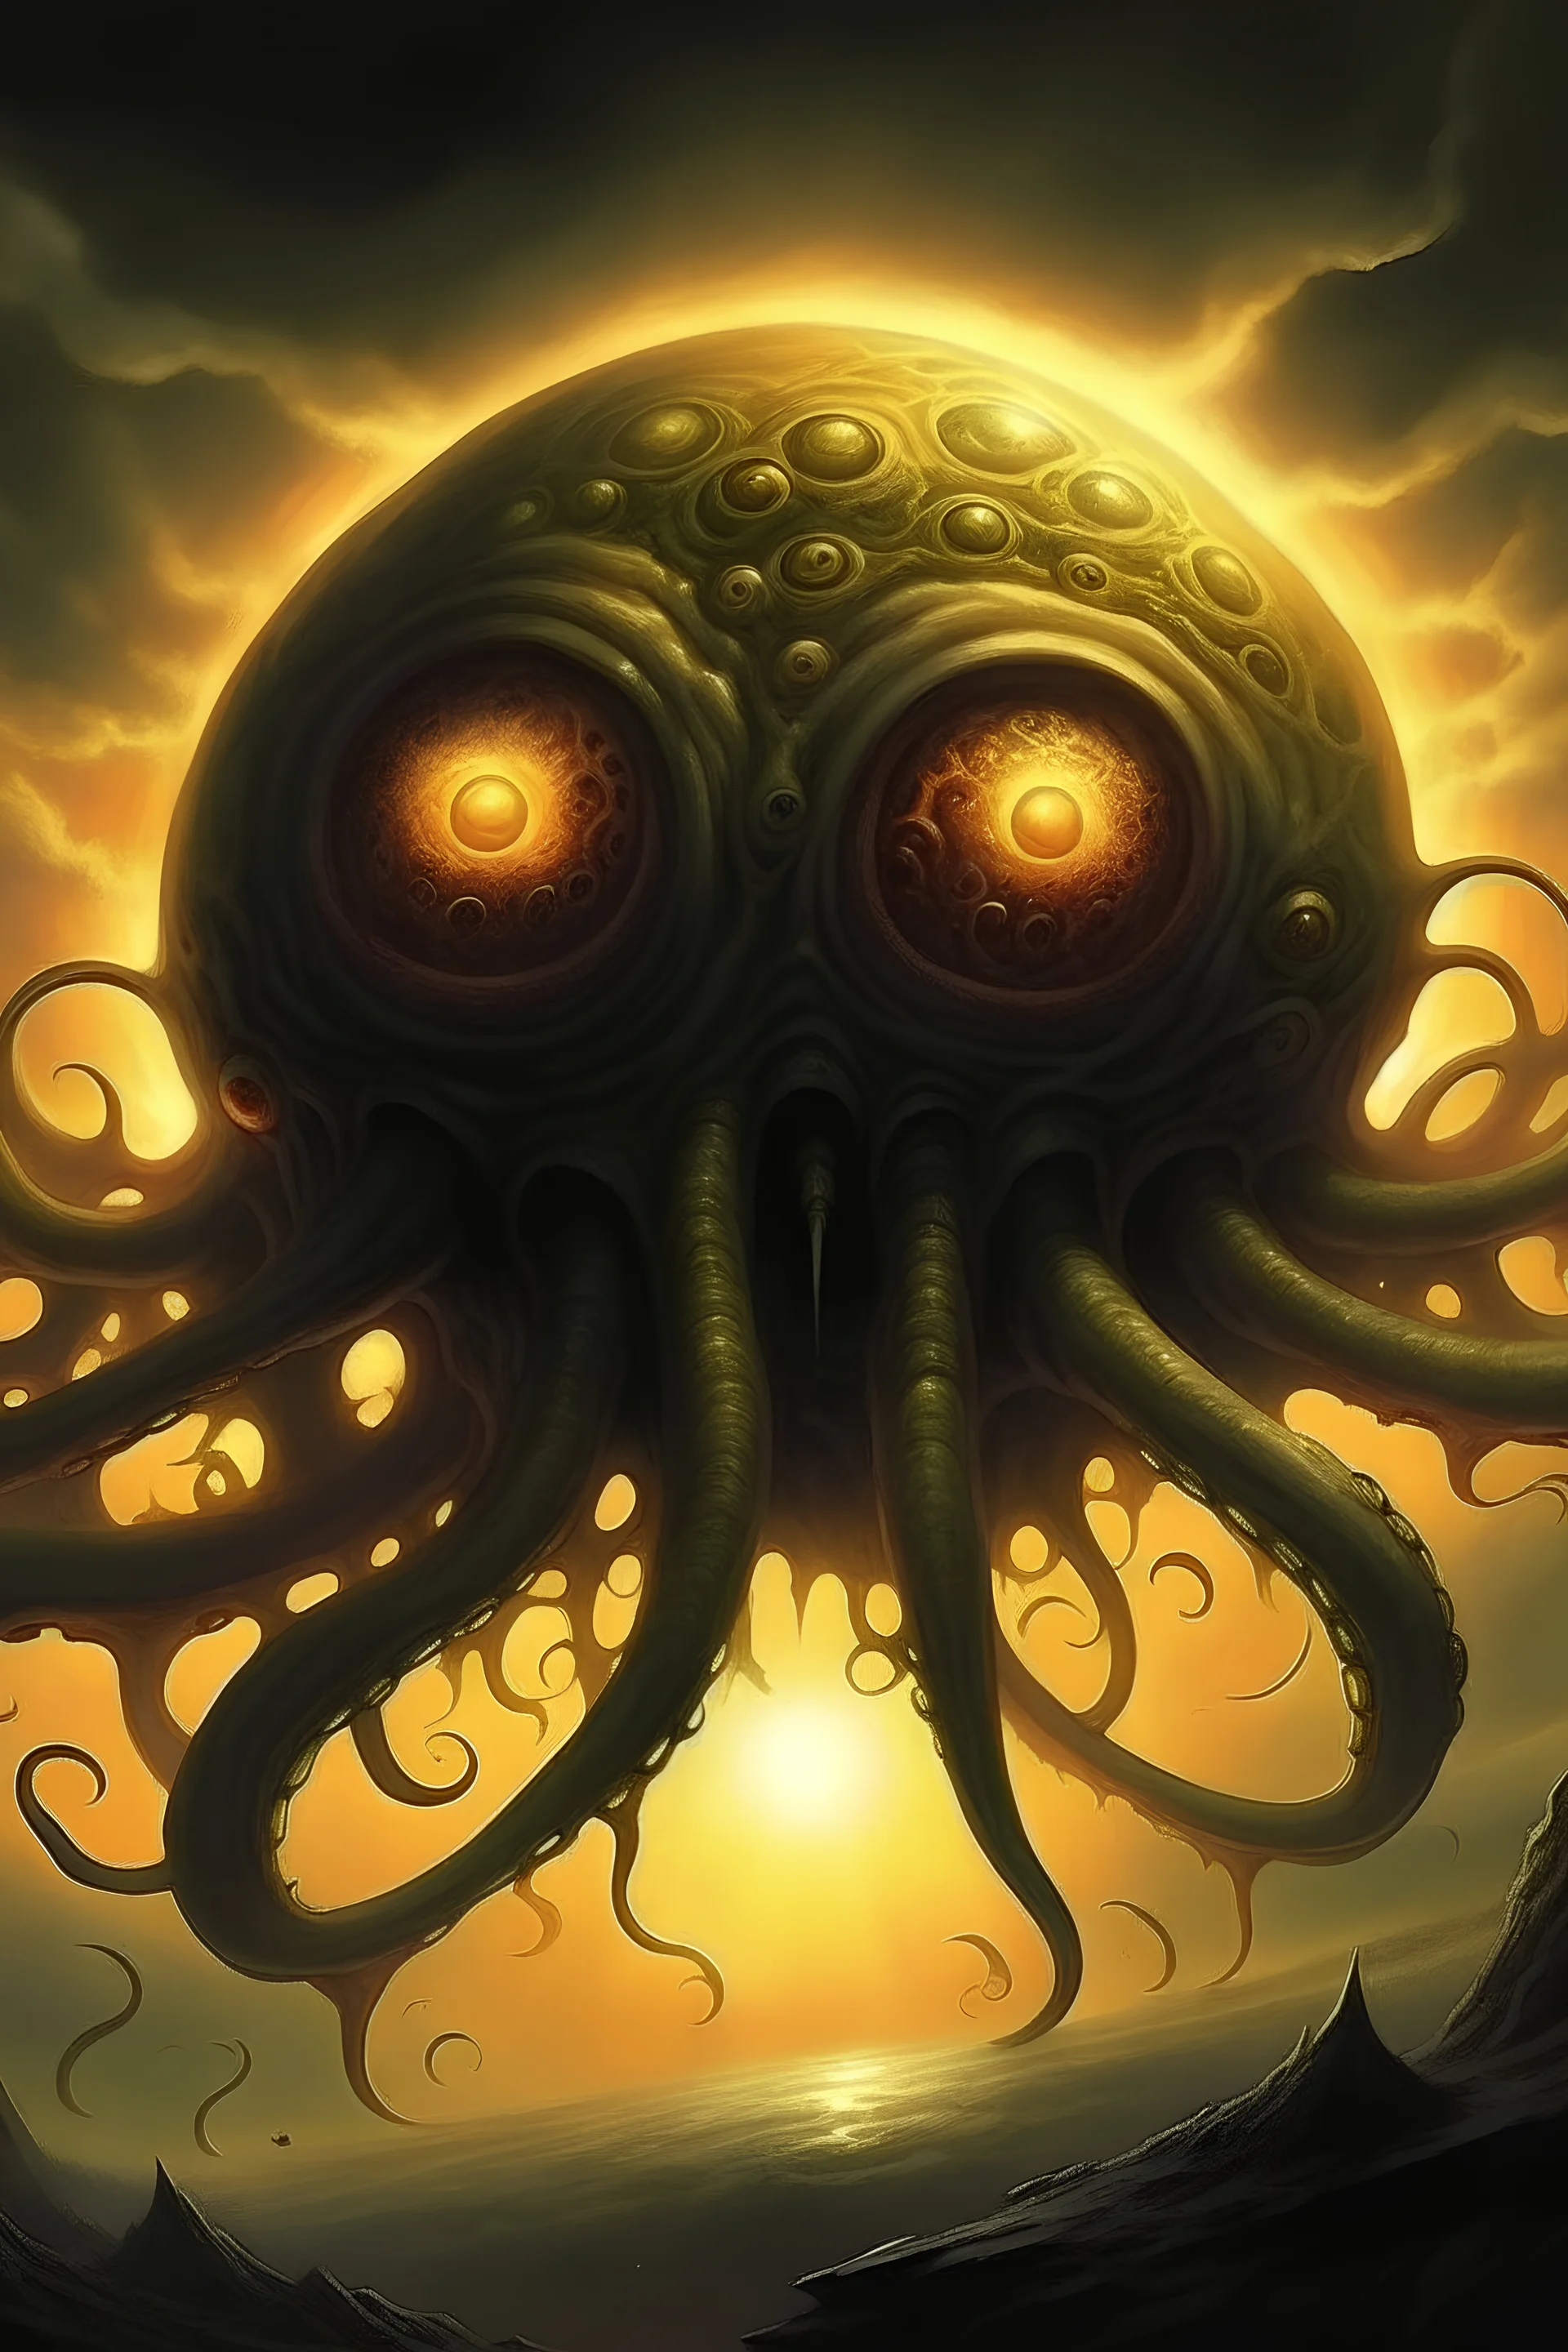 the eldritch embodiment of the sun, fleshy blob resembling the sun, with tentacles that serve as eyelashes for the large singular eye in the center, it looks like the sun but isn't